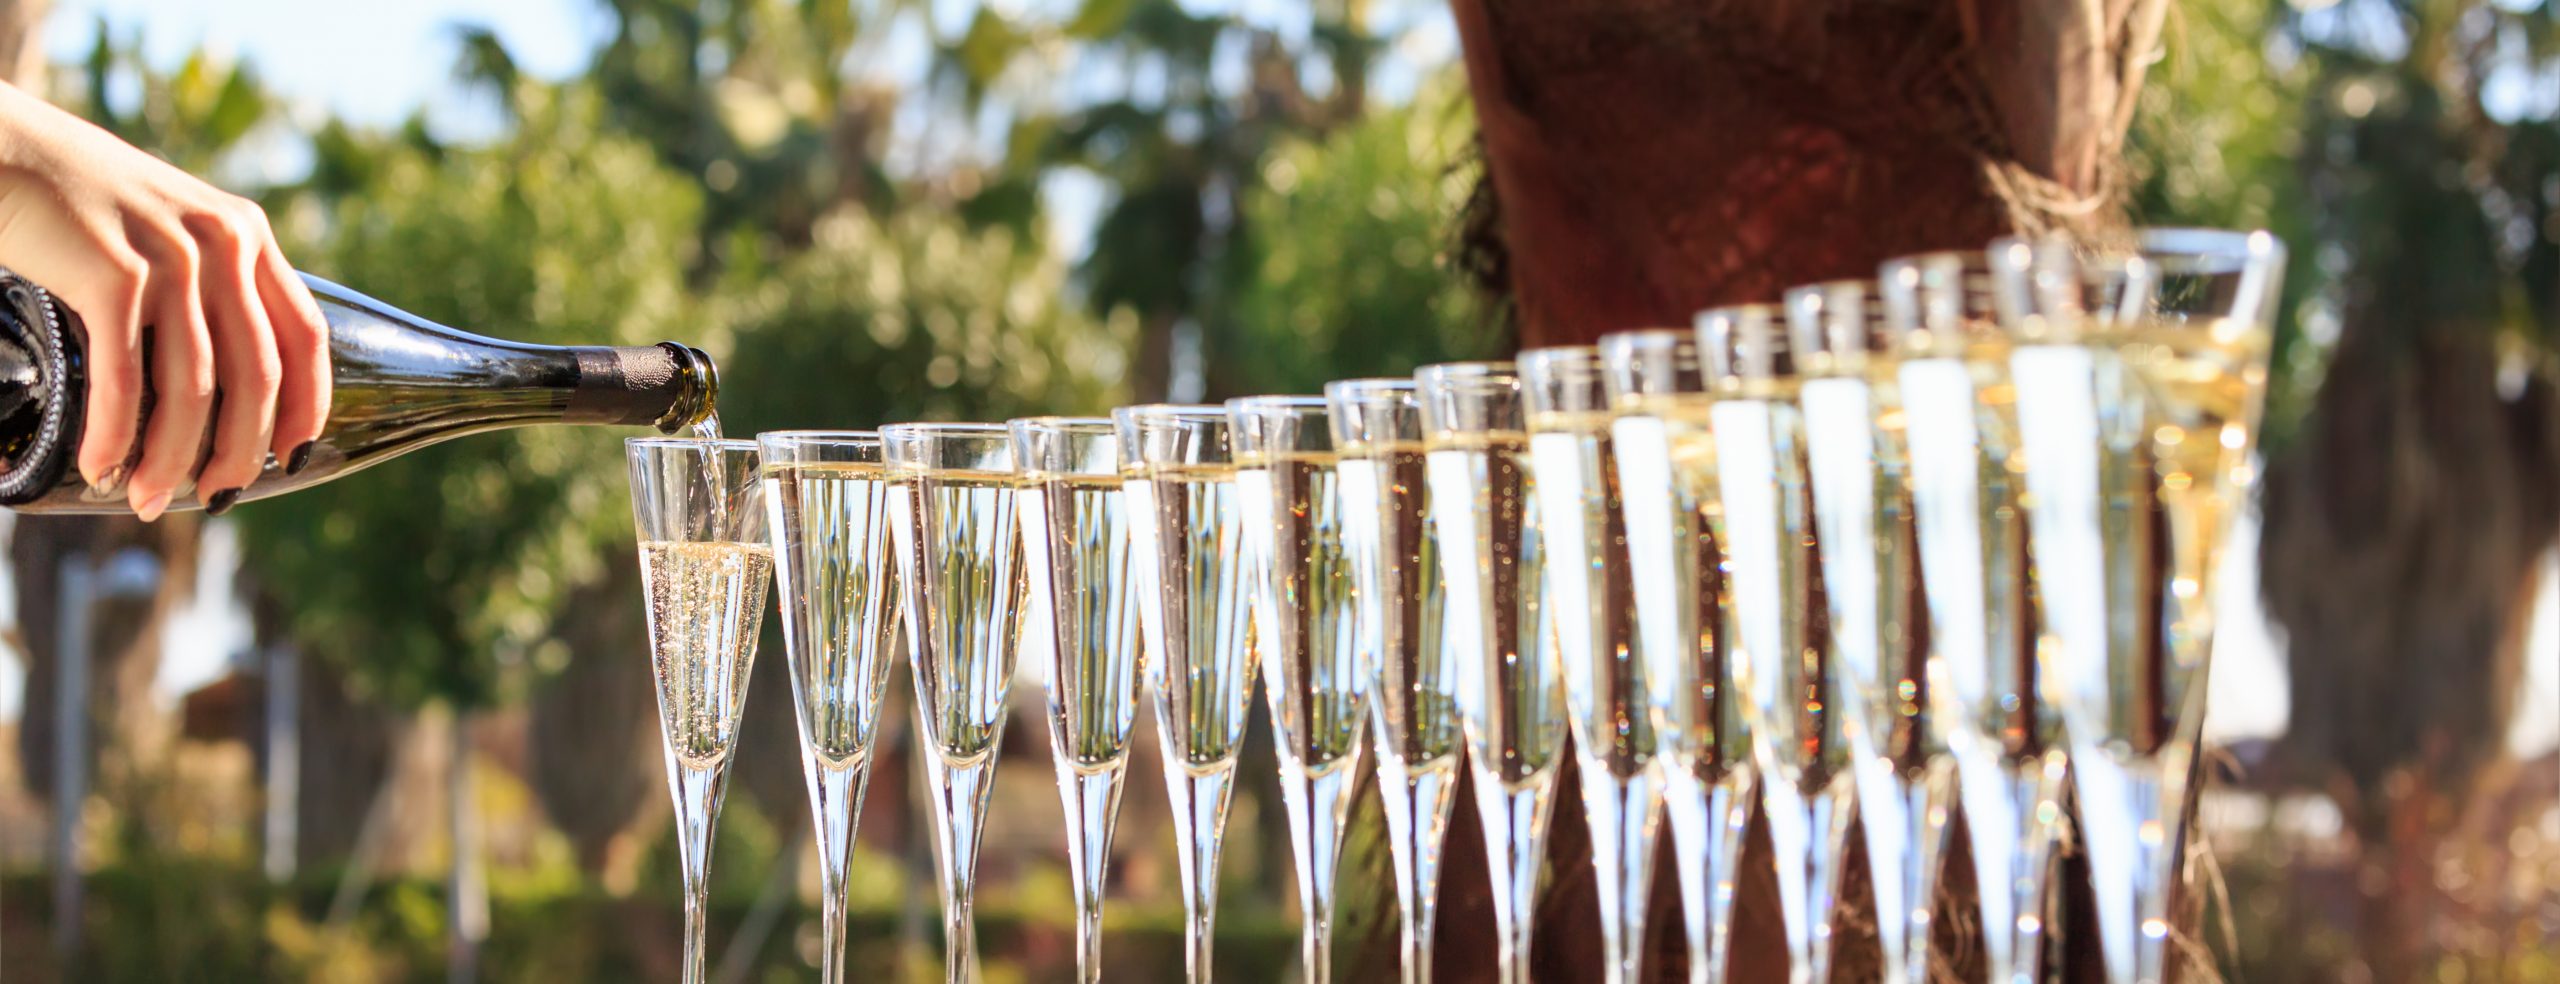 Many glasses of English Sparkling Wine being poured at an outdoor party.